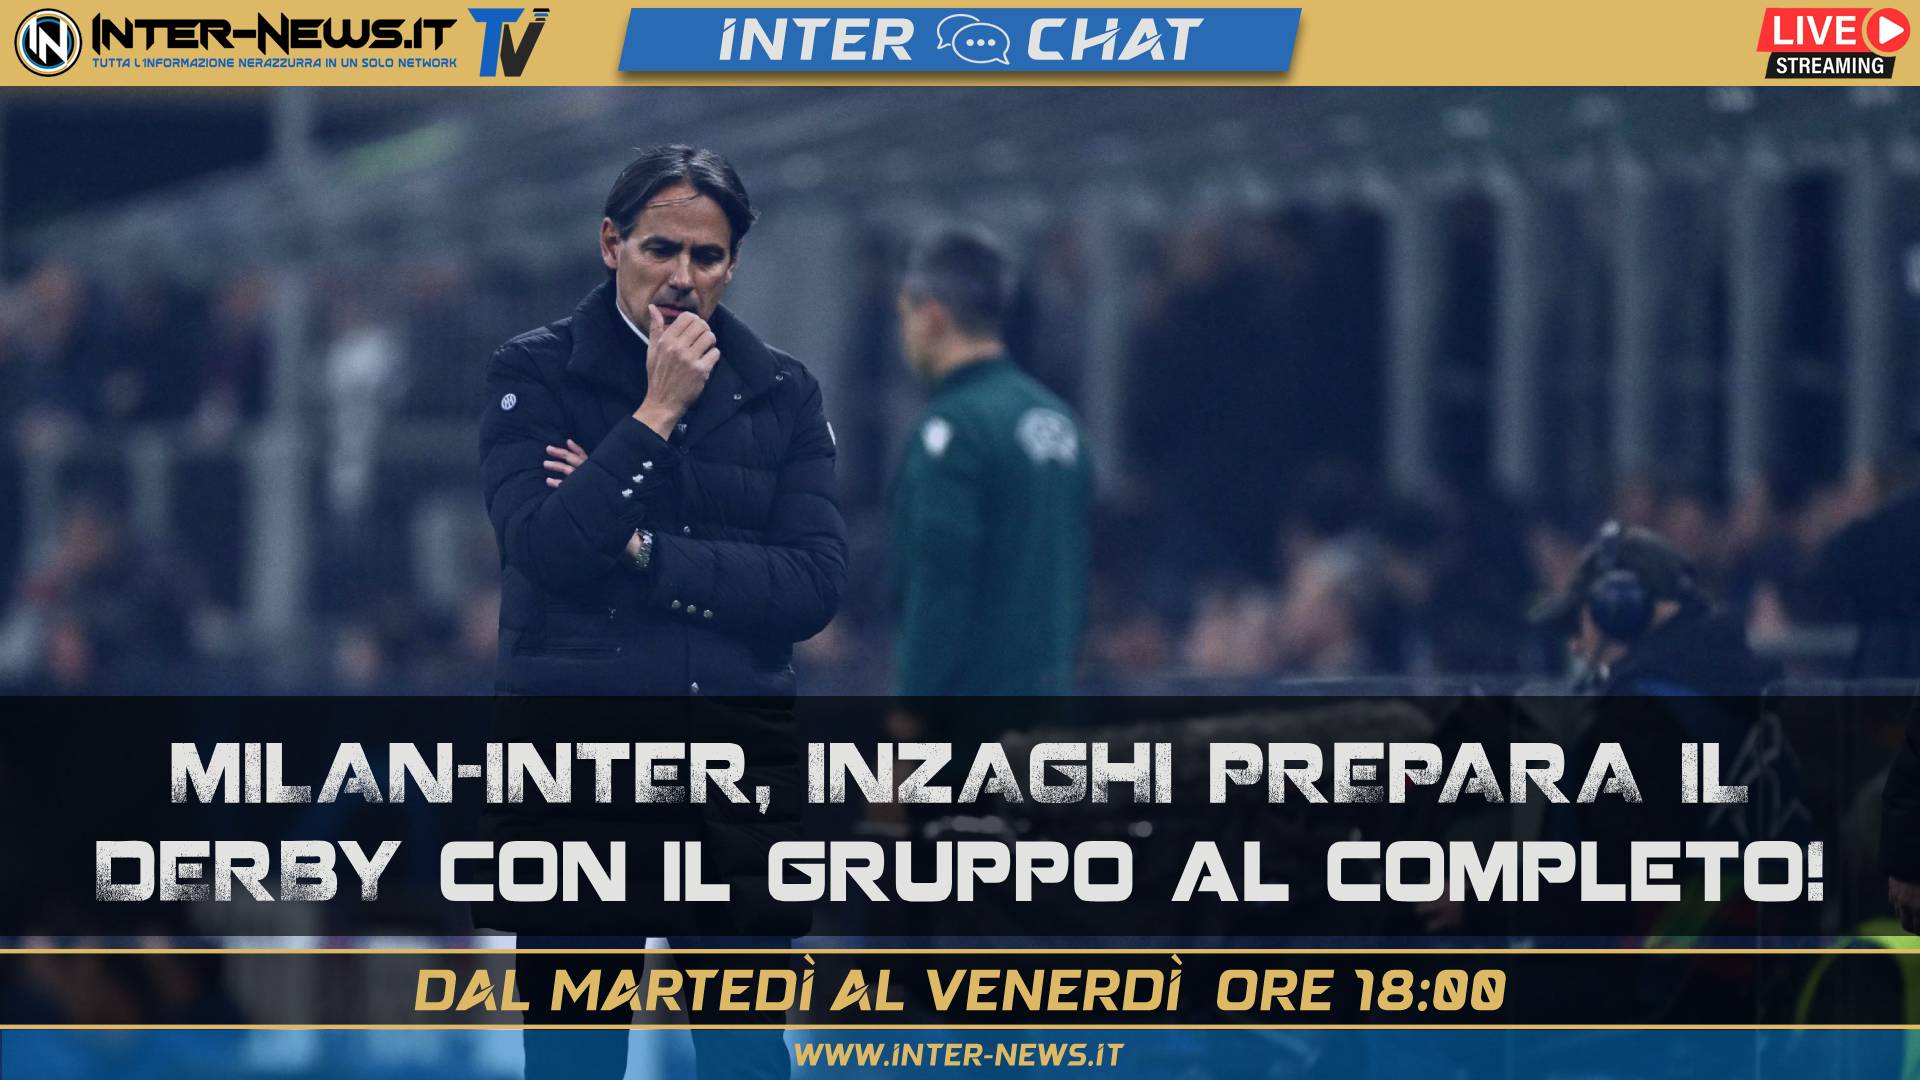 VIDEO – Milan Inter, a lavoro! Inzaghi al completo | Inter Chat